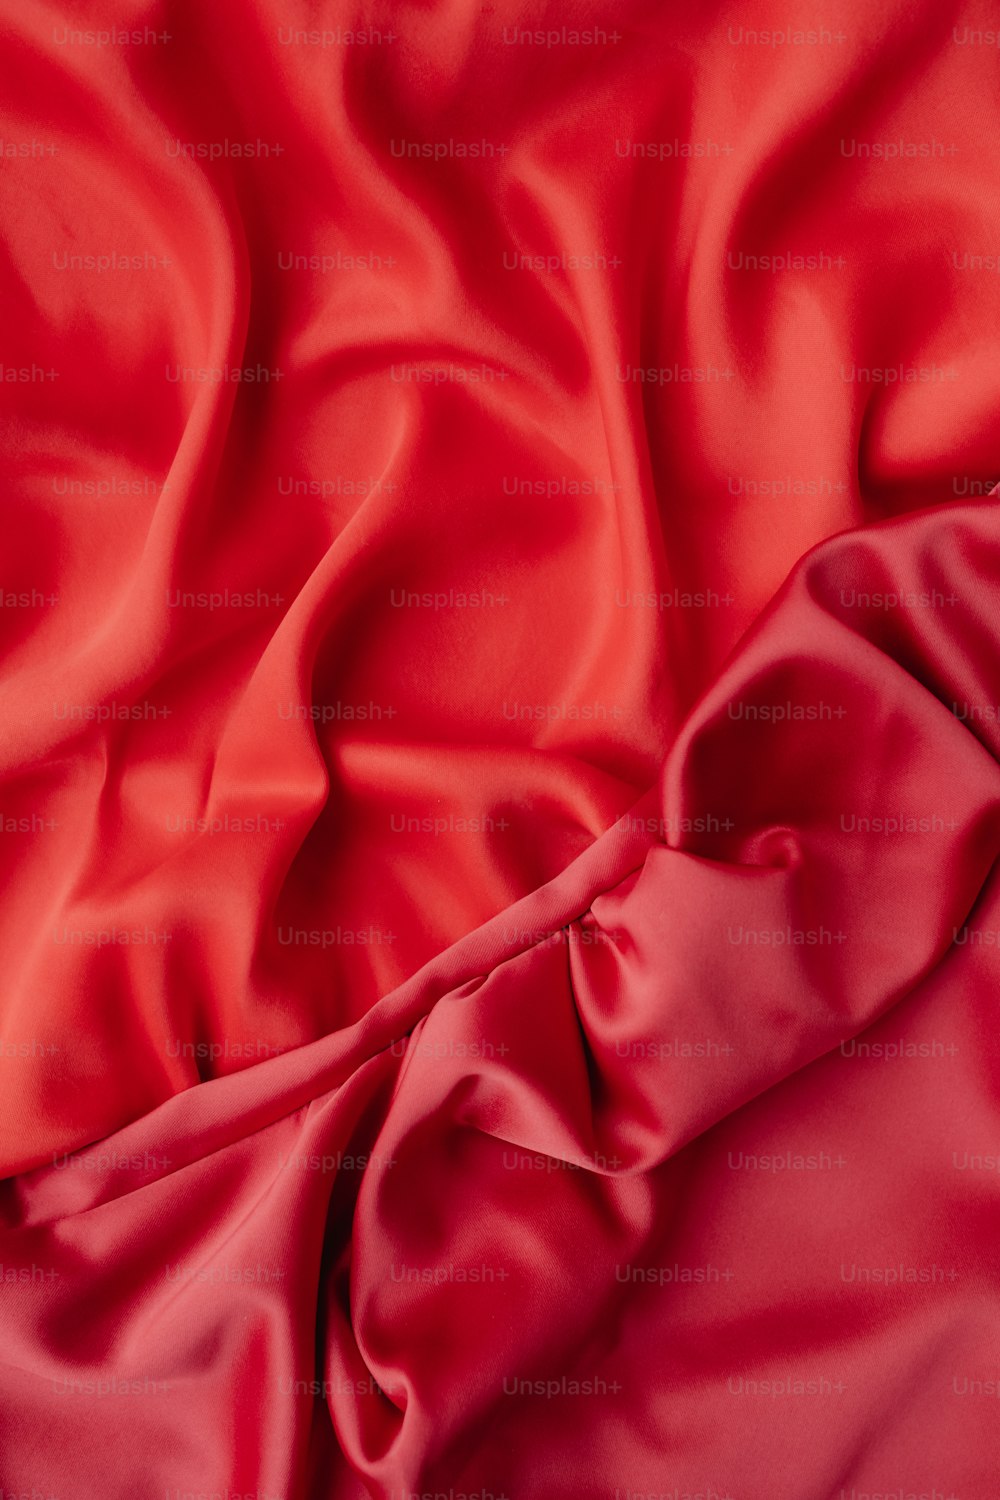 64,000+ Red Cloth Texture Pictures